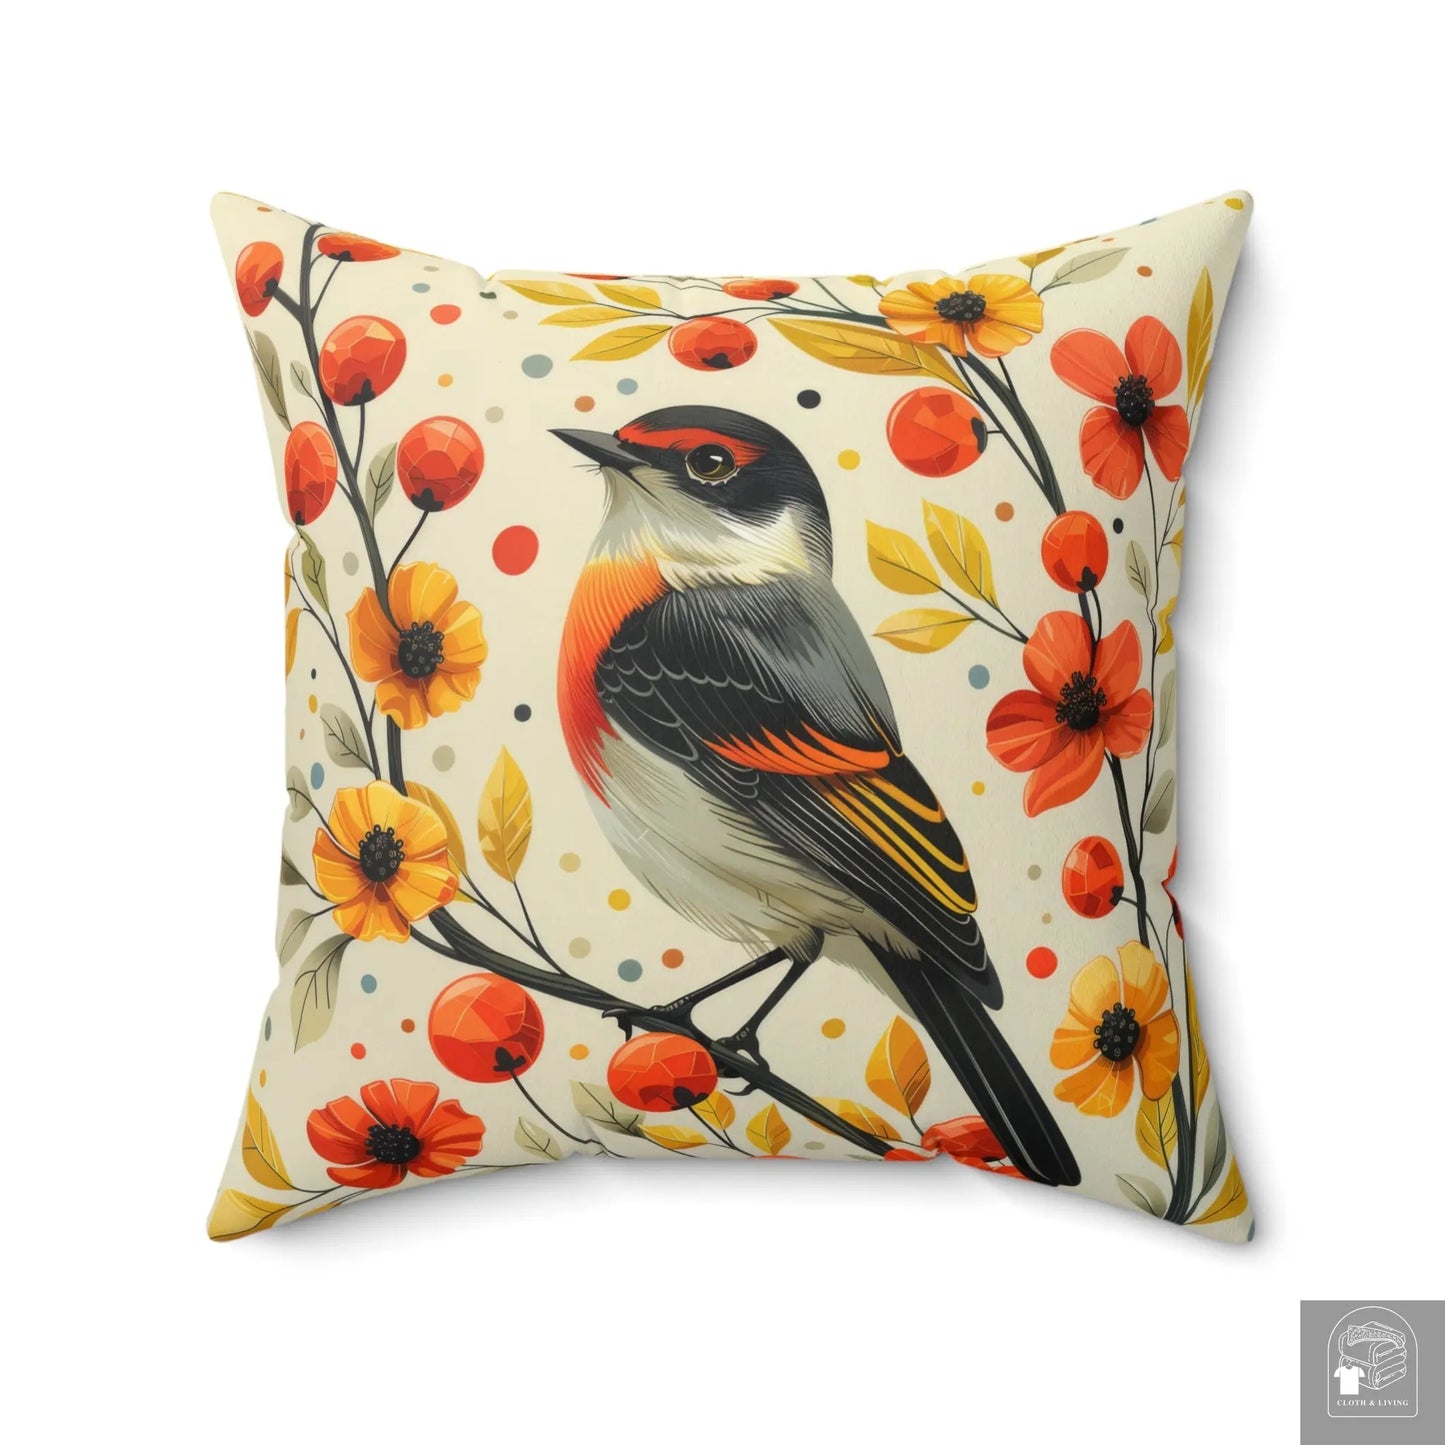 Autumn Serenade - Whimsical Bird & Flowers Pillow (Available in various sizes) -   Cloth & Living